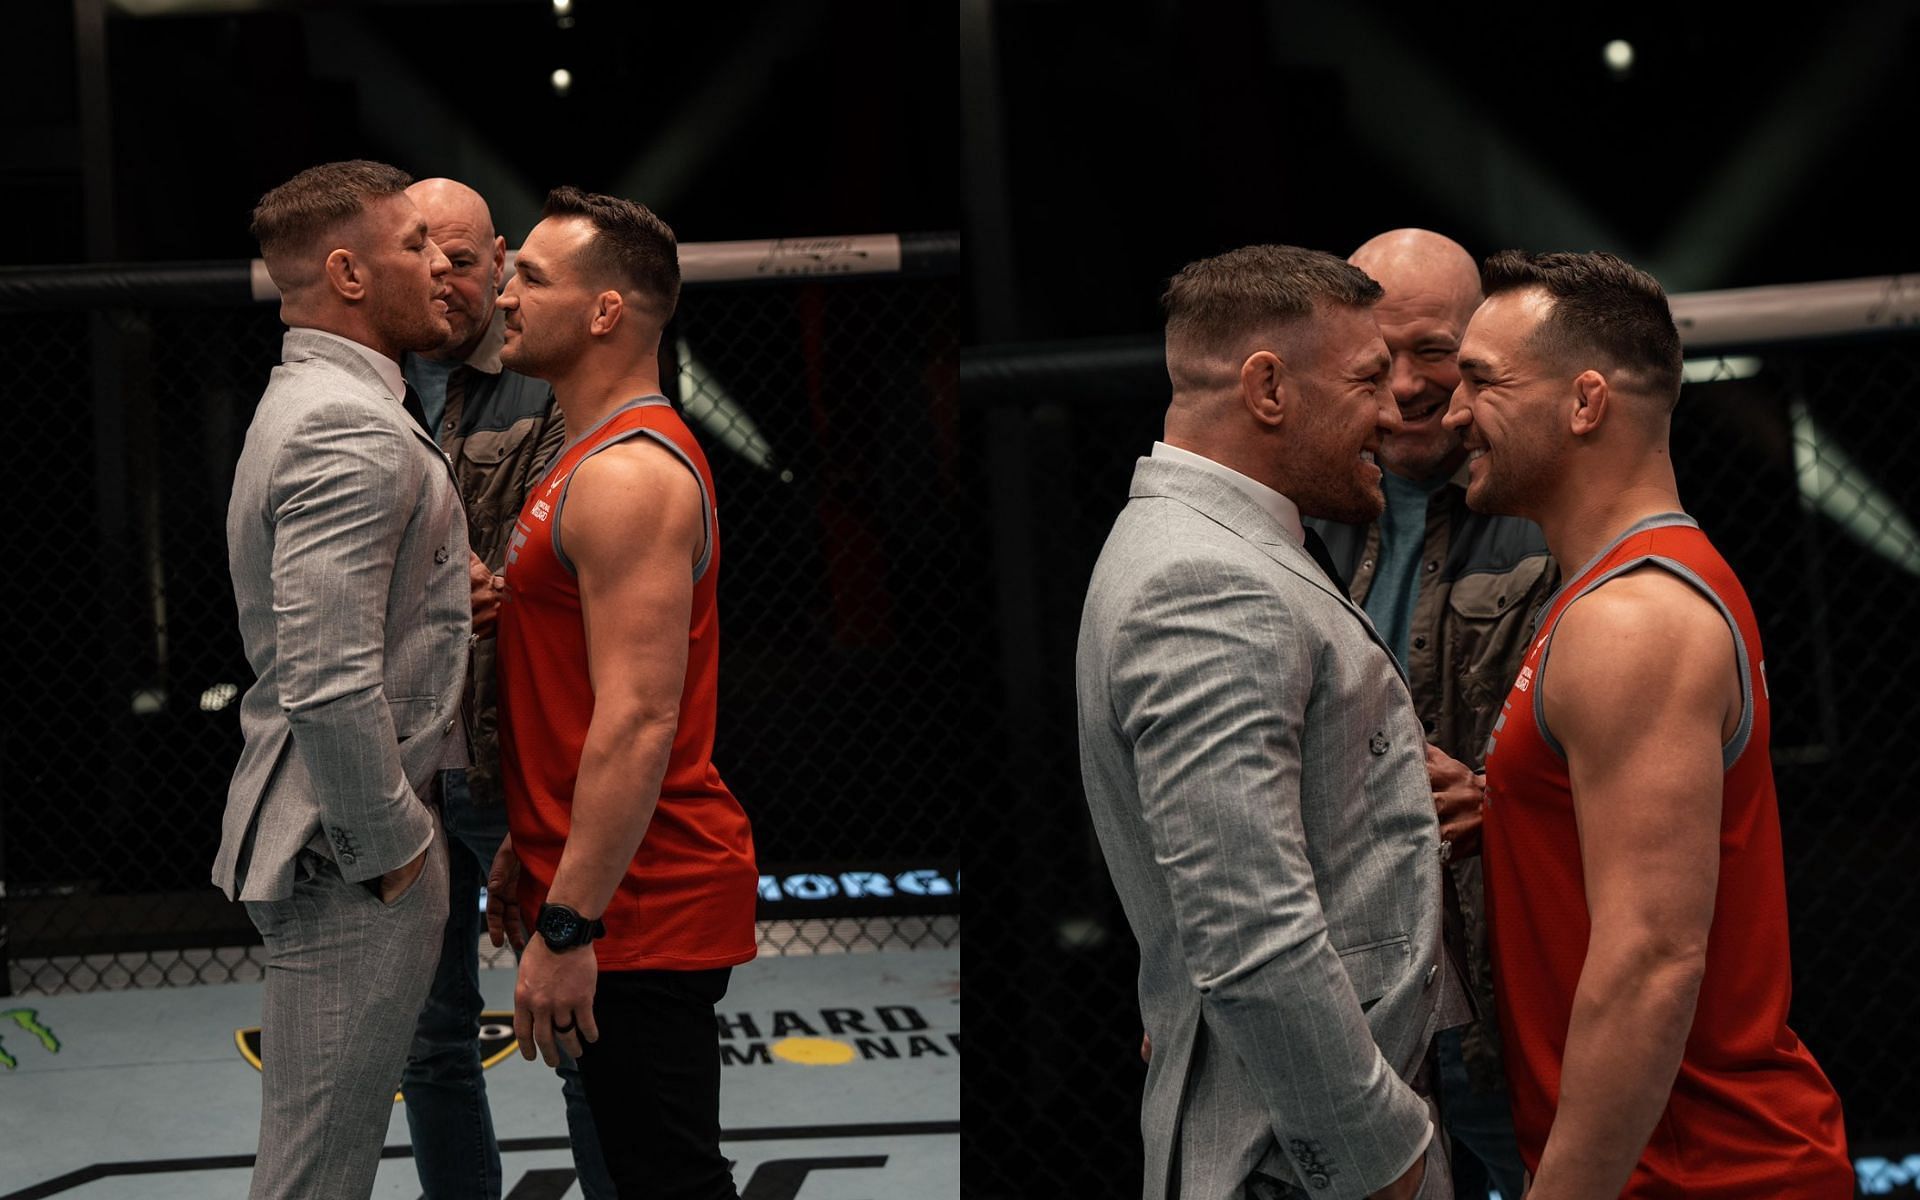 Conor McGregor (left), Dana White (center), and Michael Chandler (right)  (Image credits @TheNotoriousMMA)